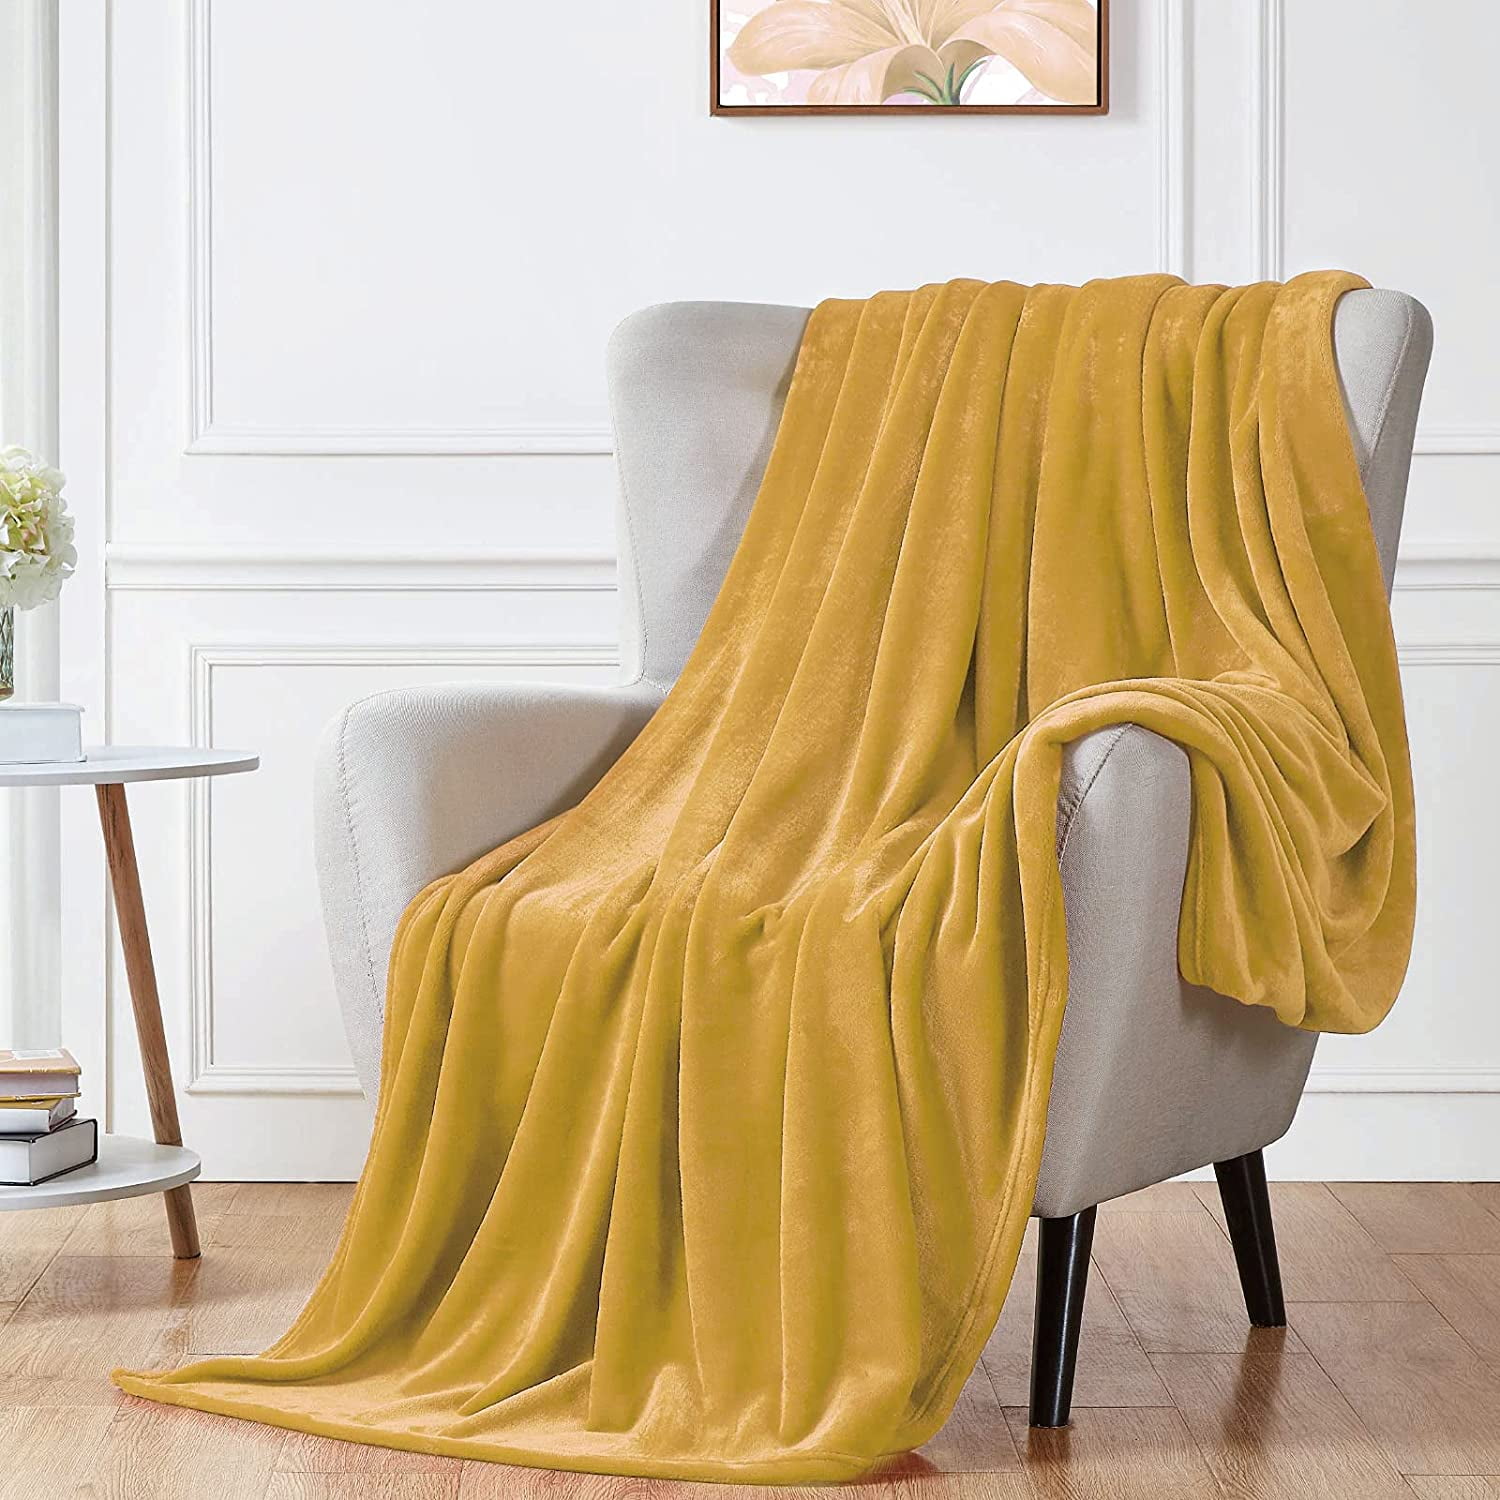 Walensee Fleece Blanket Plush Throw Fuzzy Lightweight Sofa Ultra Luxurious Warm and Cozy for All Seasons Super Soft Microfiber Flannel Blankets for Couch Bed Queen Size 90x90 Honey Gold